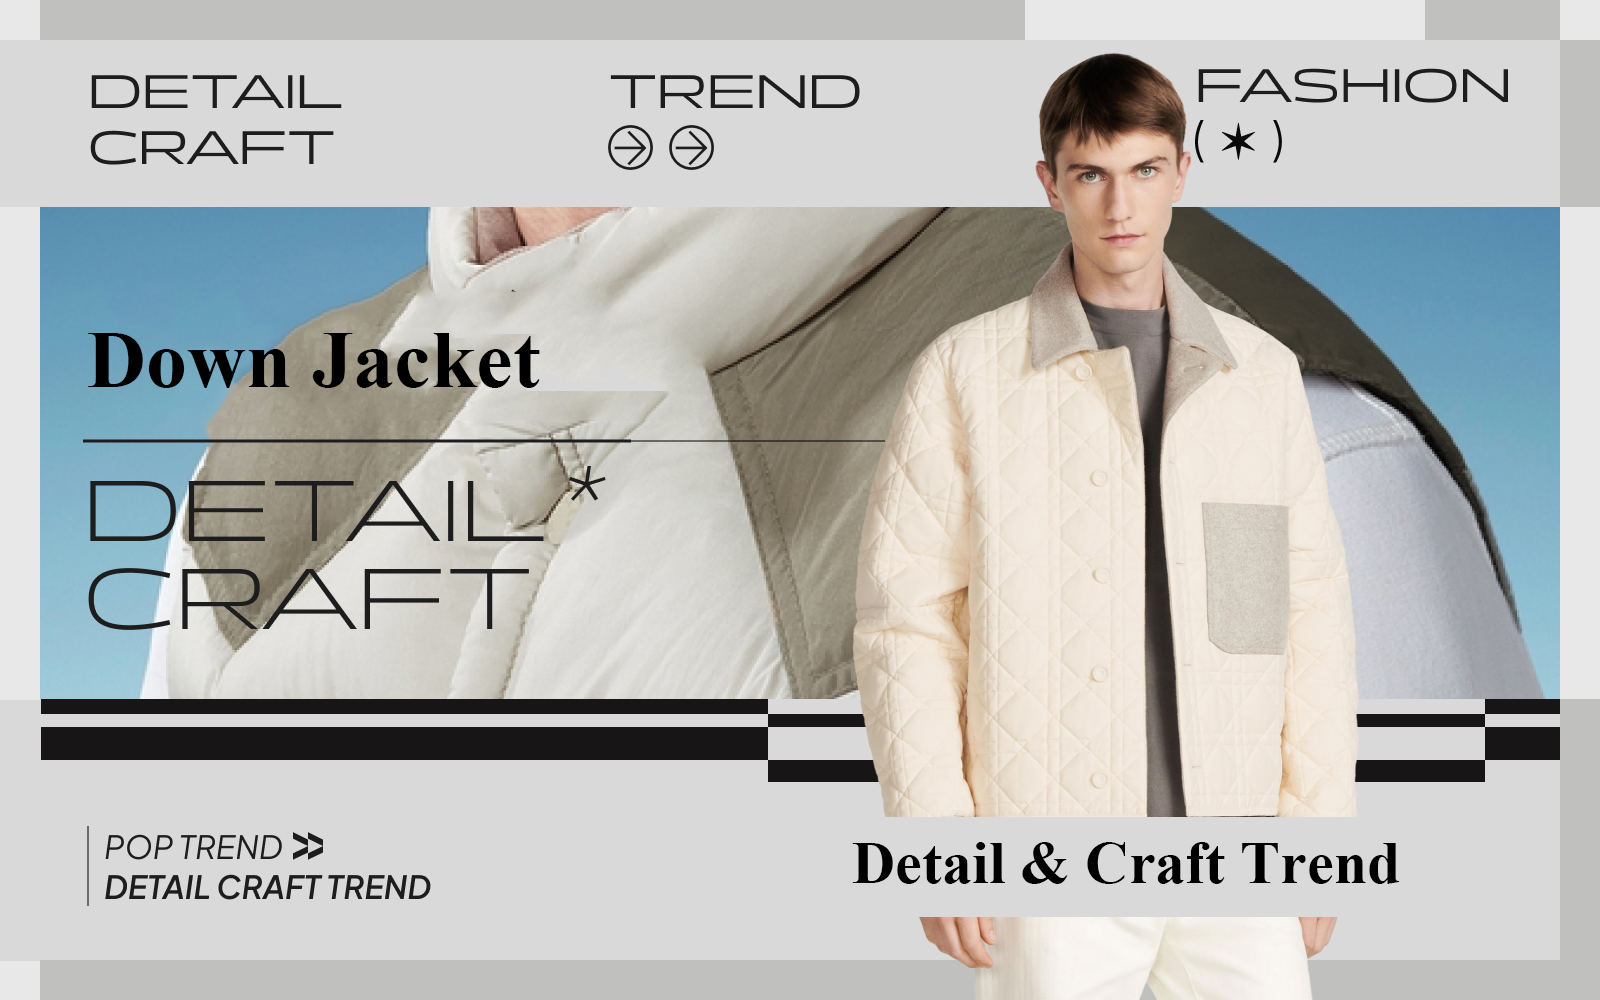 All-around Protection -- The Detail & Craft Trend for Men's Down Jacket